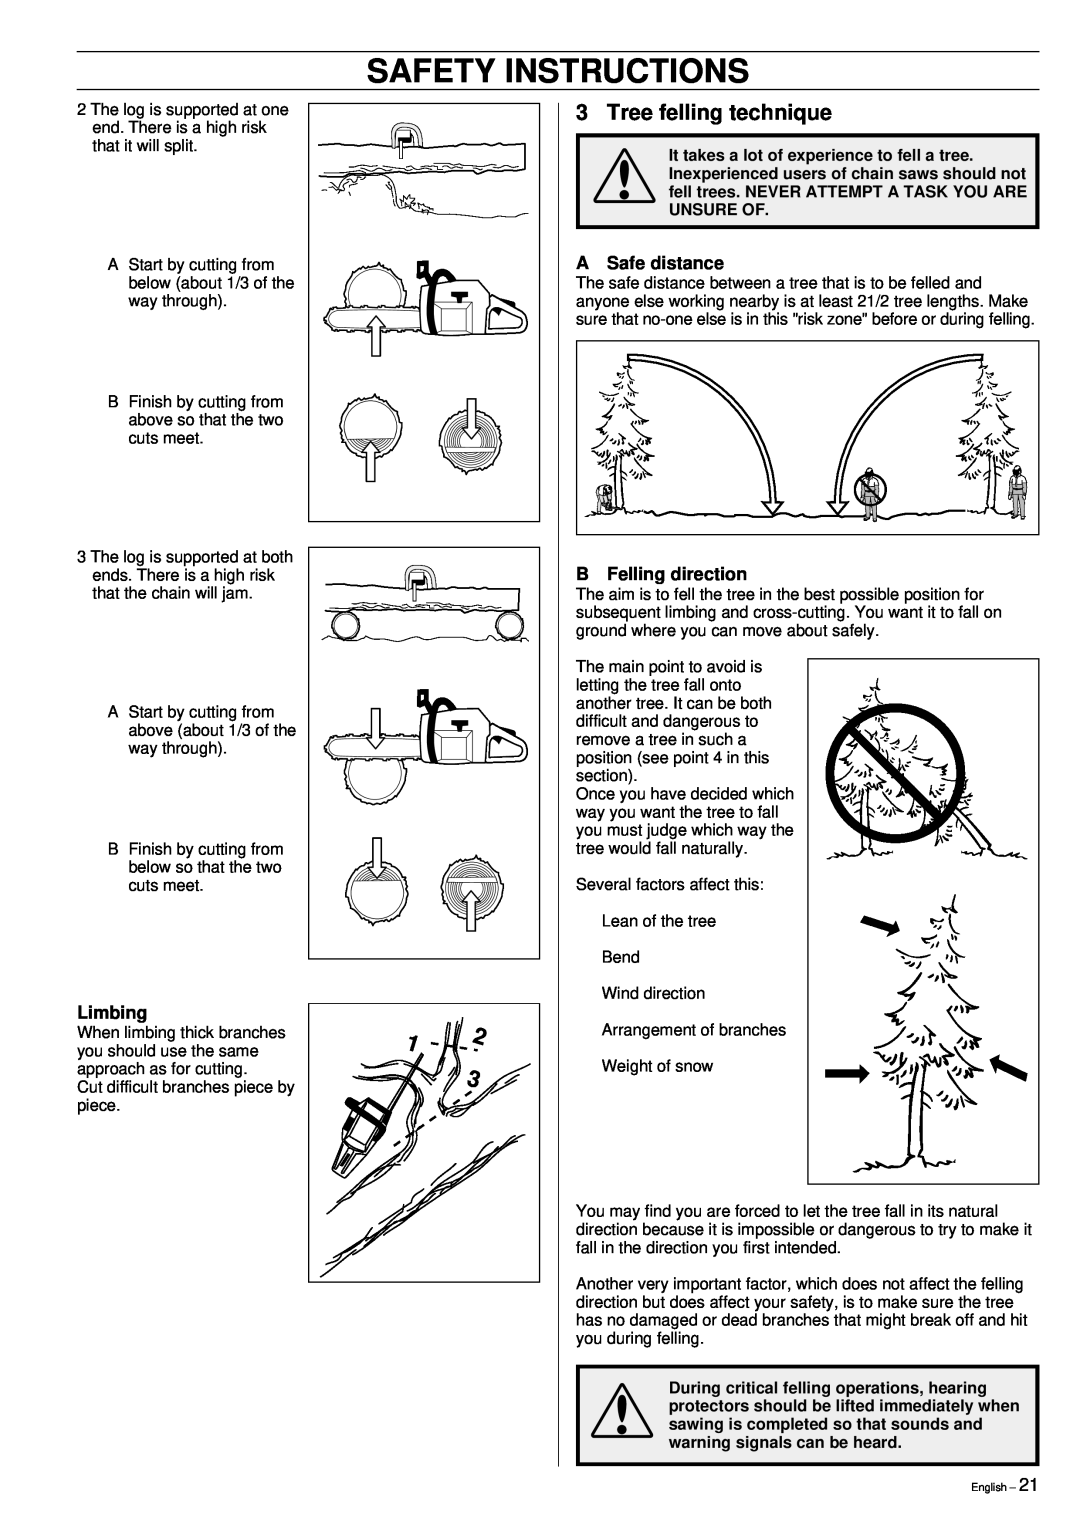 Husqvarna 395XP manual Safety Instructions, Tree felling technique, A Safe distance, Limbing, B Felling direction 